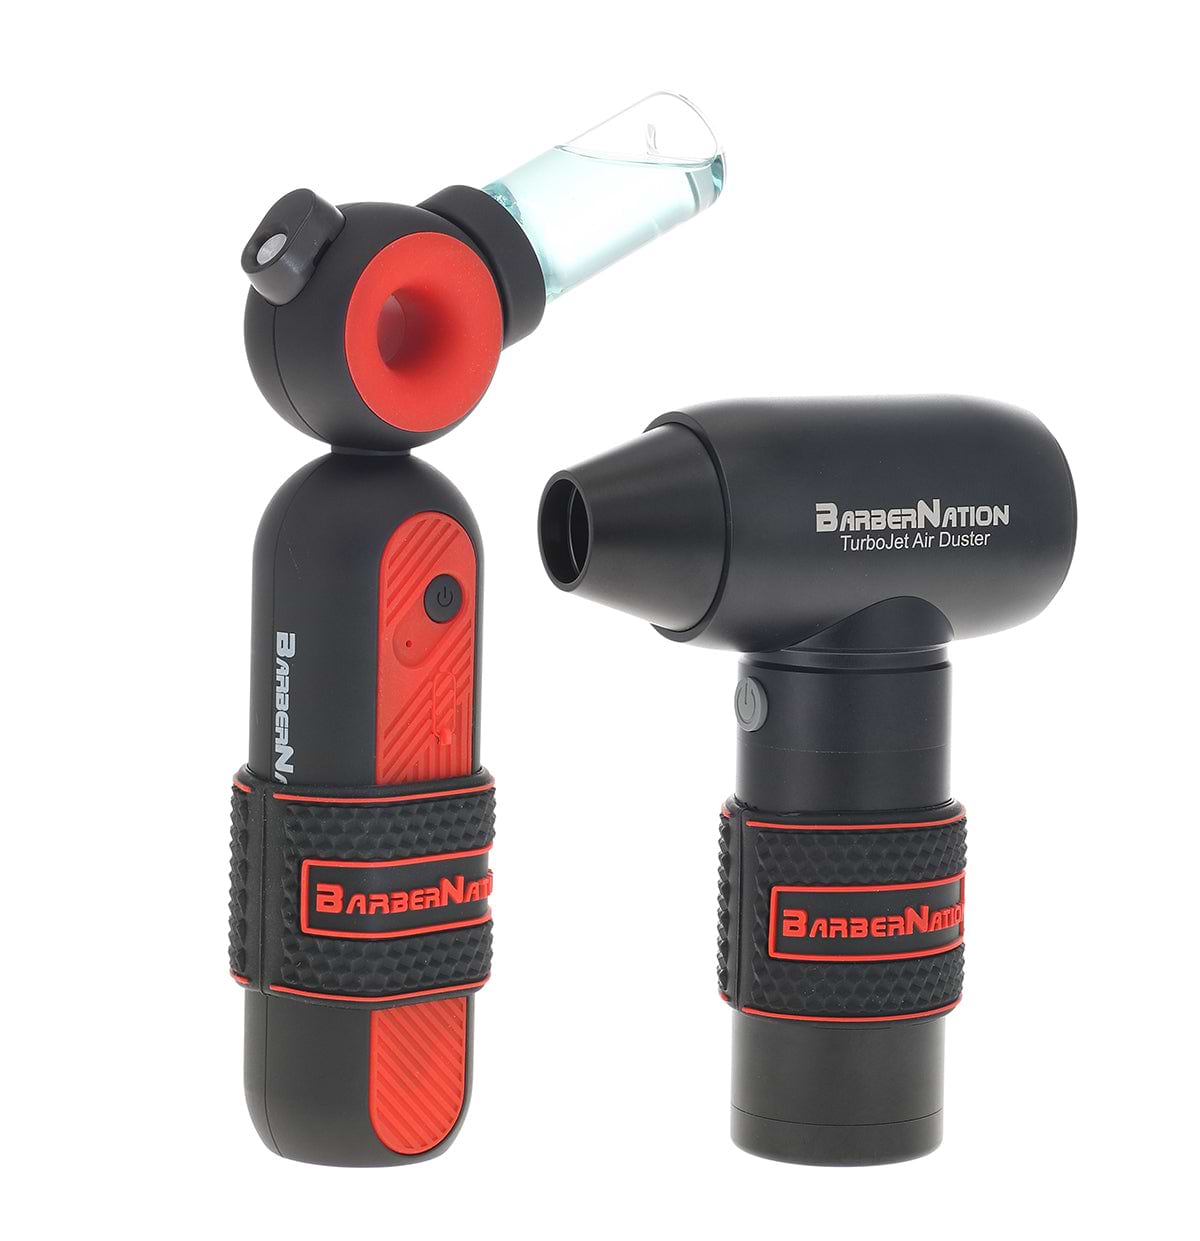 BarberNation Keep It Clean Kit (Aftershave Gun & TurboJet Air Duster Pro) - Red CamoFX